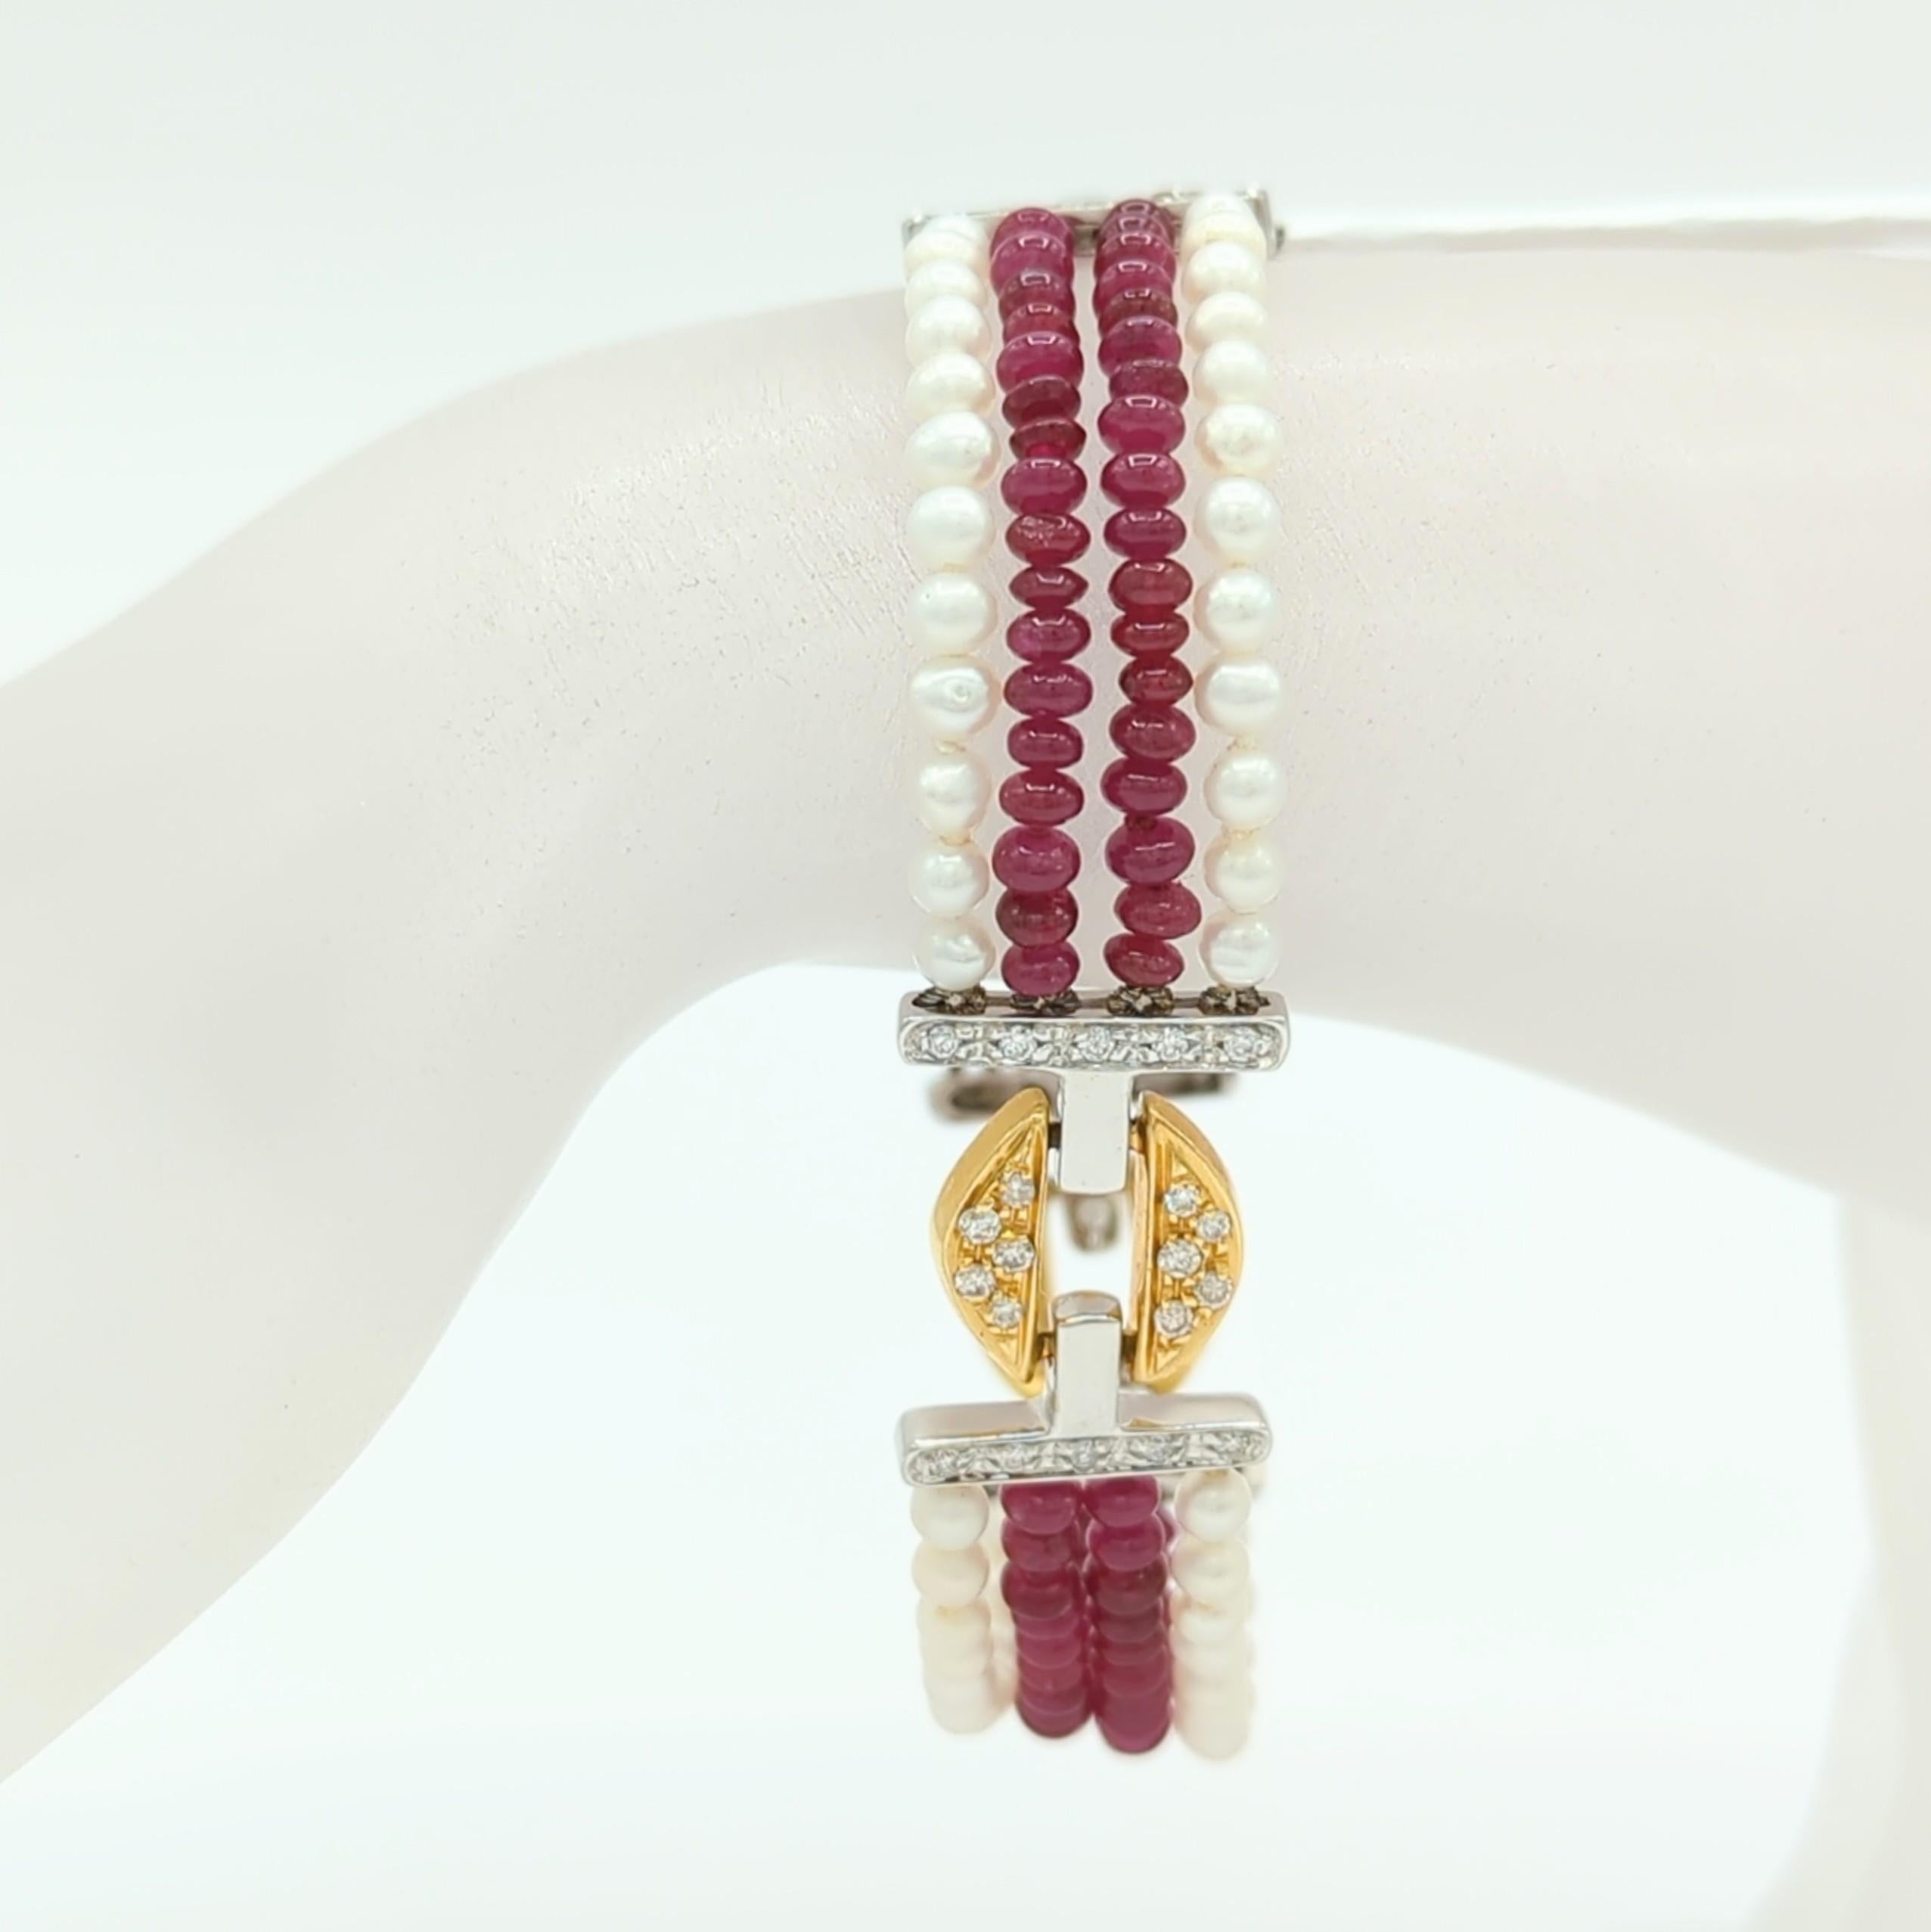 Round Cut Ruby Bead, White Pearl, and White Diamond Bracelet in 18K 2 Tone Gold